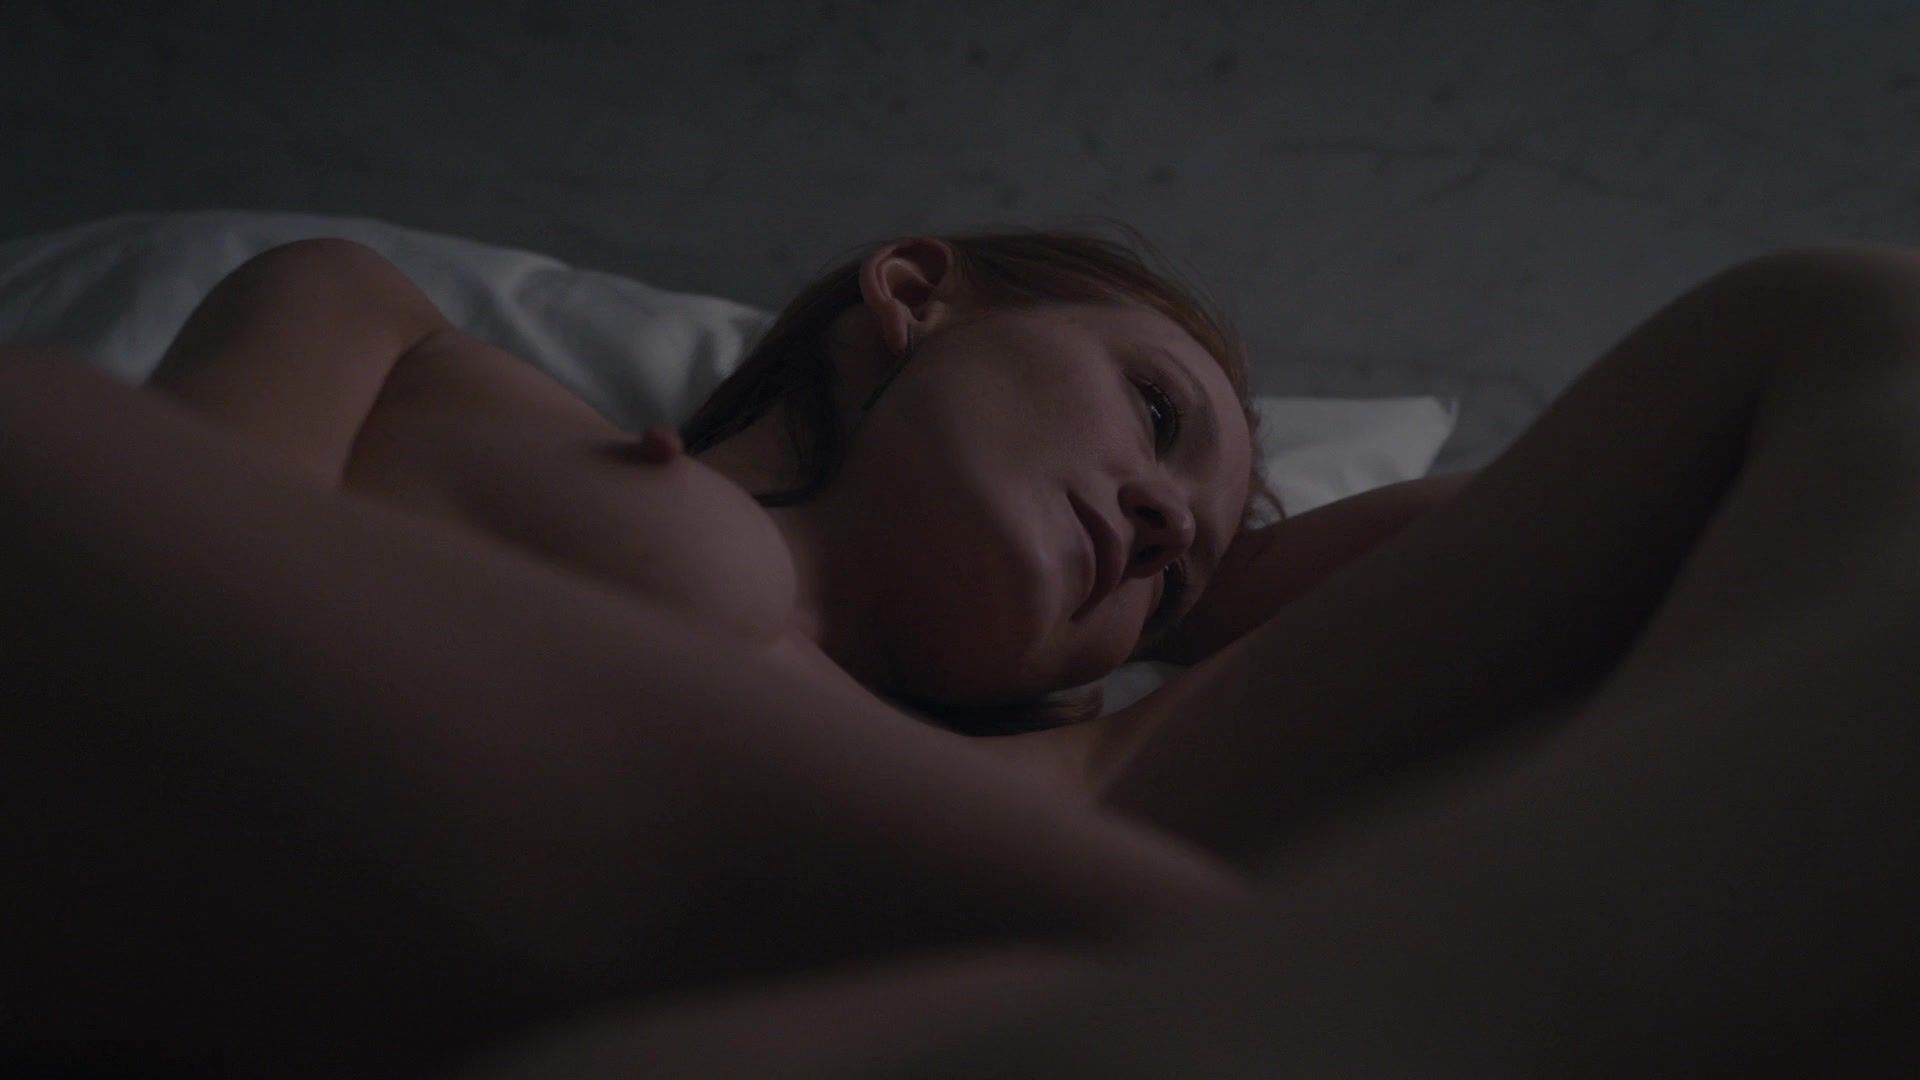 Big Booty Louisa Krause, Anna Friel Nude - The Girlfriend Experience s02e03 (2017) Penis Sucking - 1